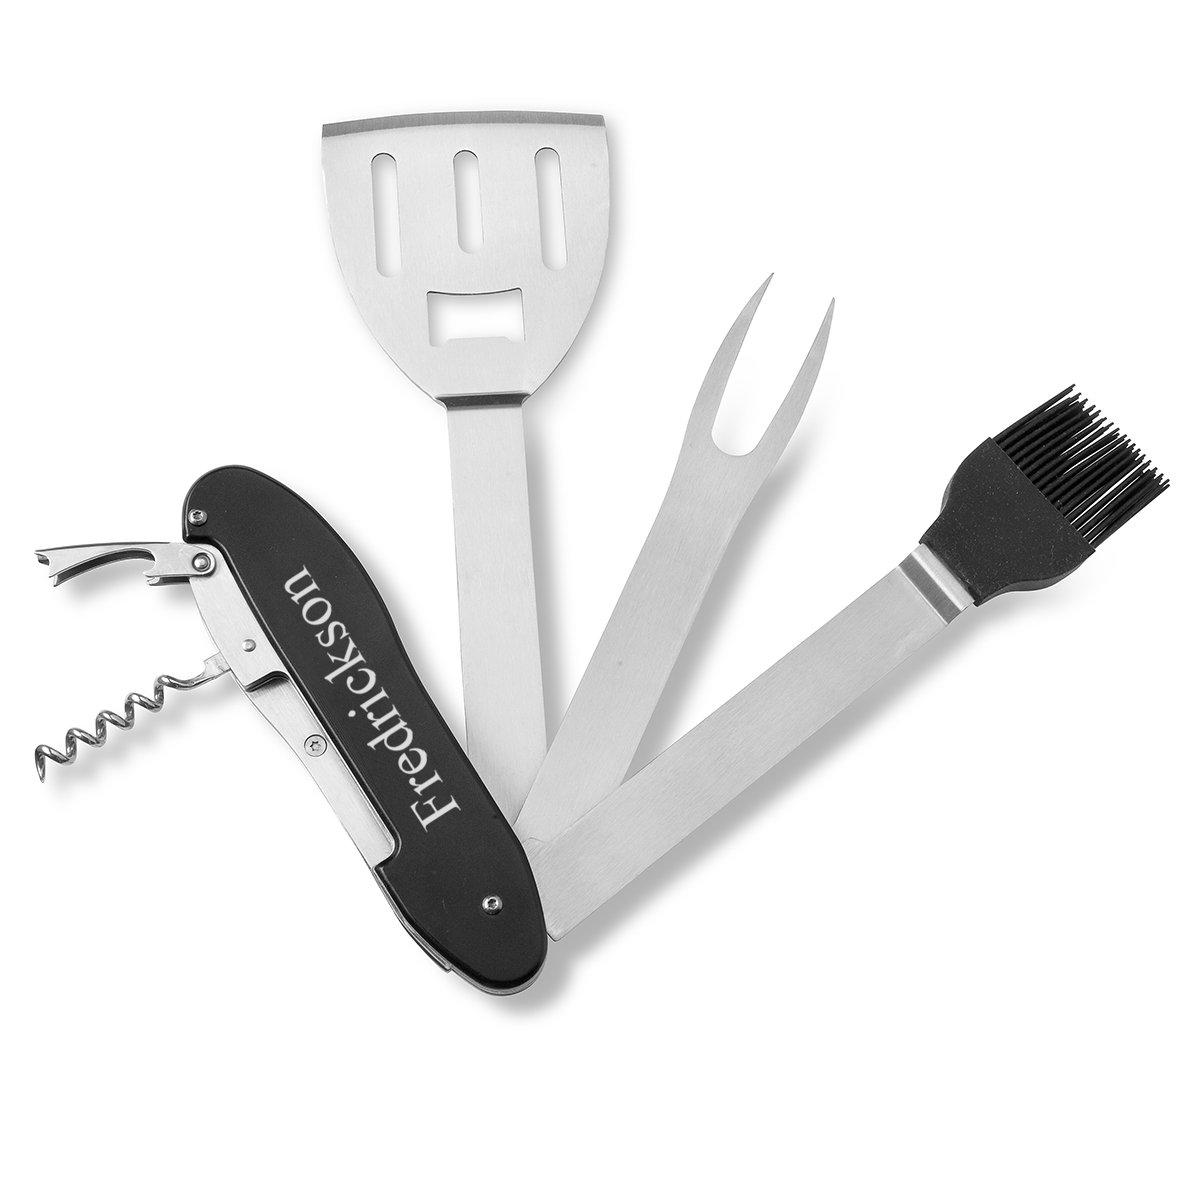 Personalized 5 In 1 Bbq Tool Set - Black